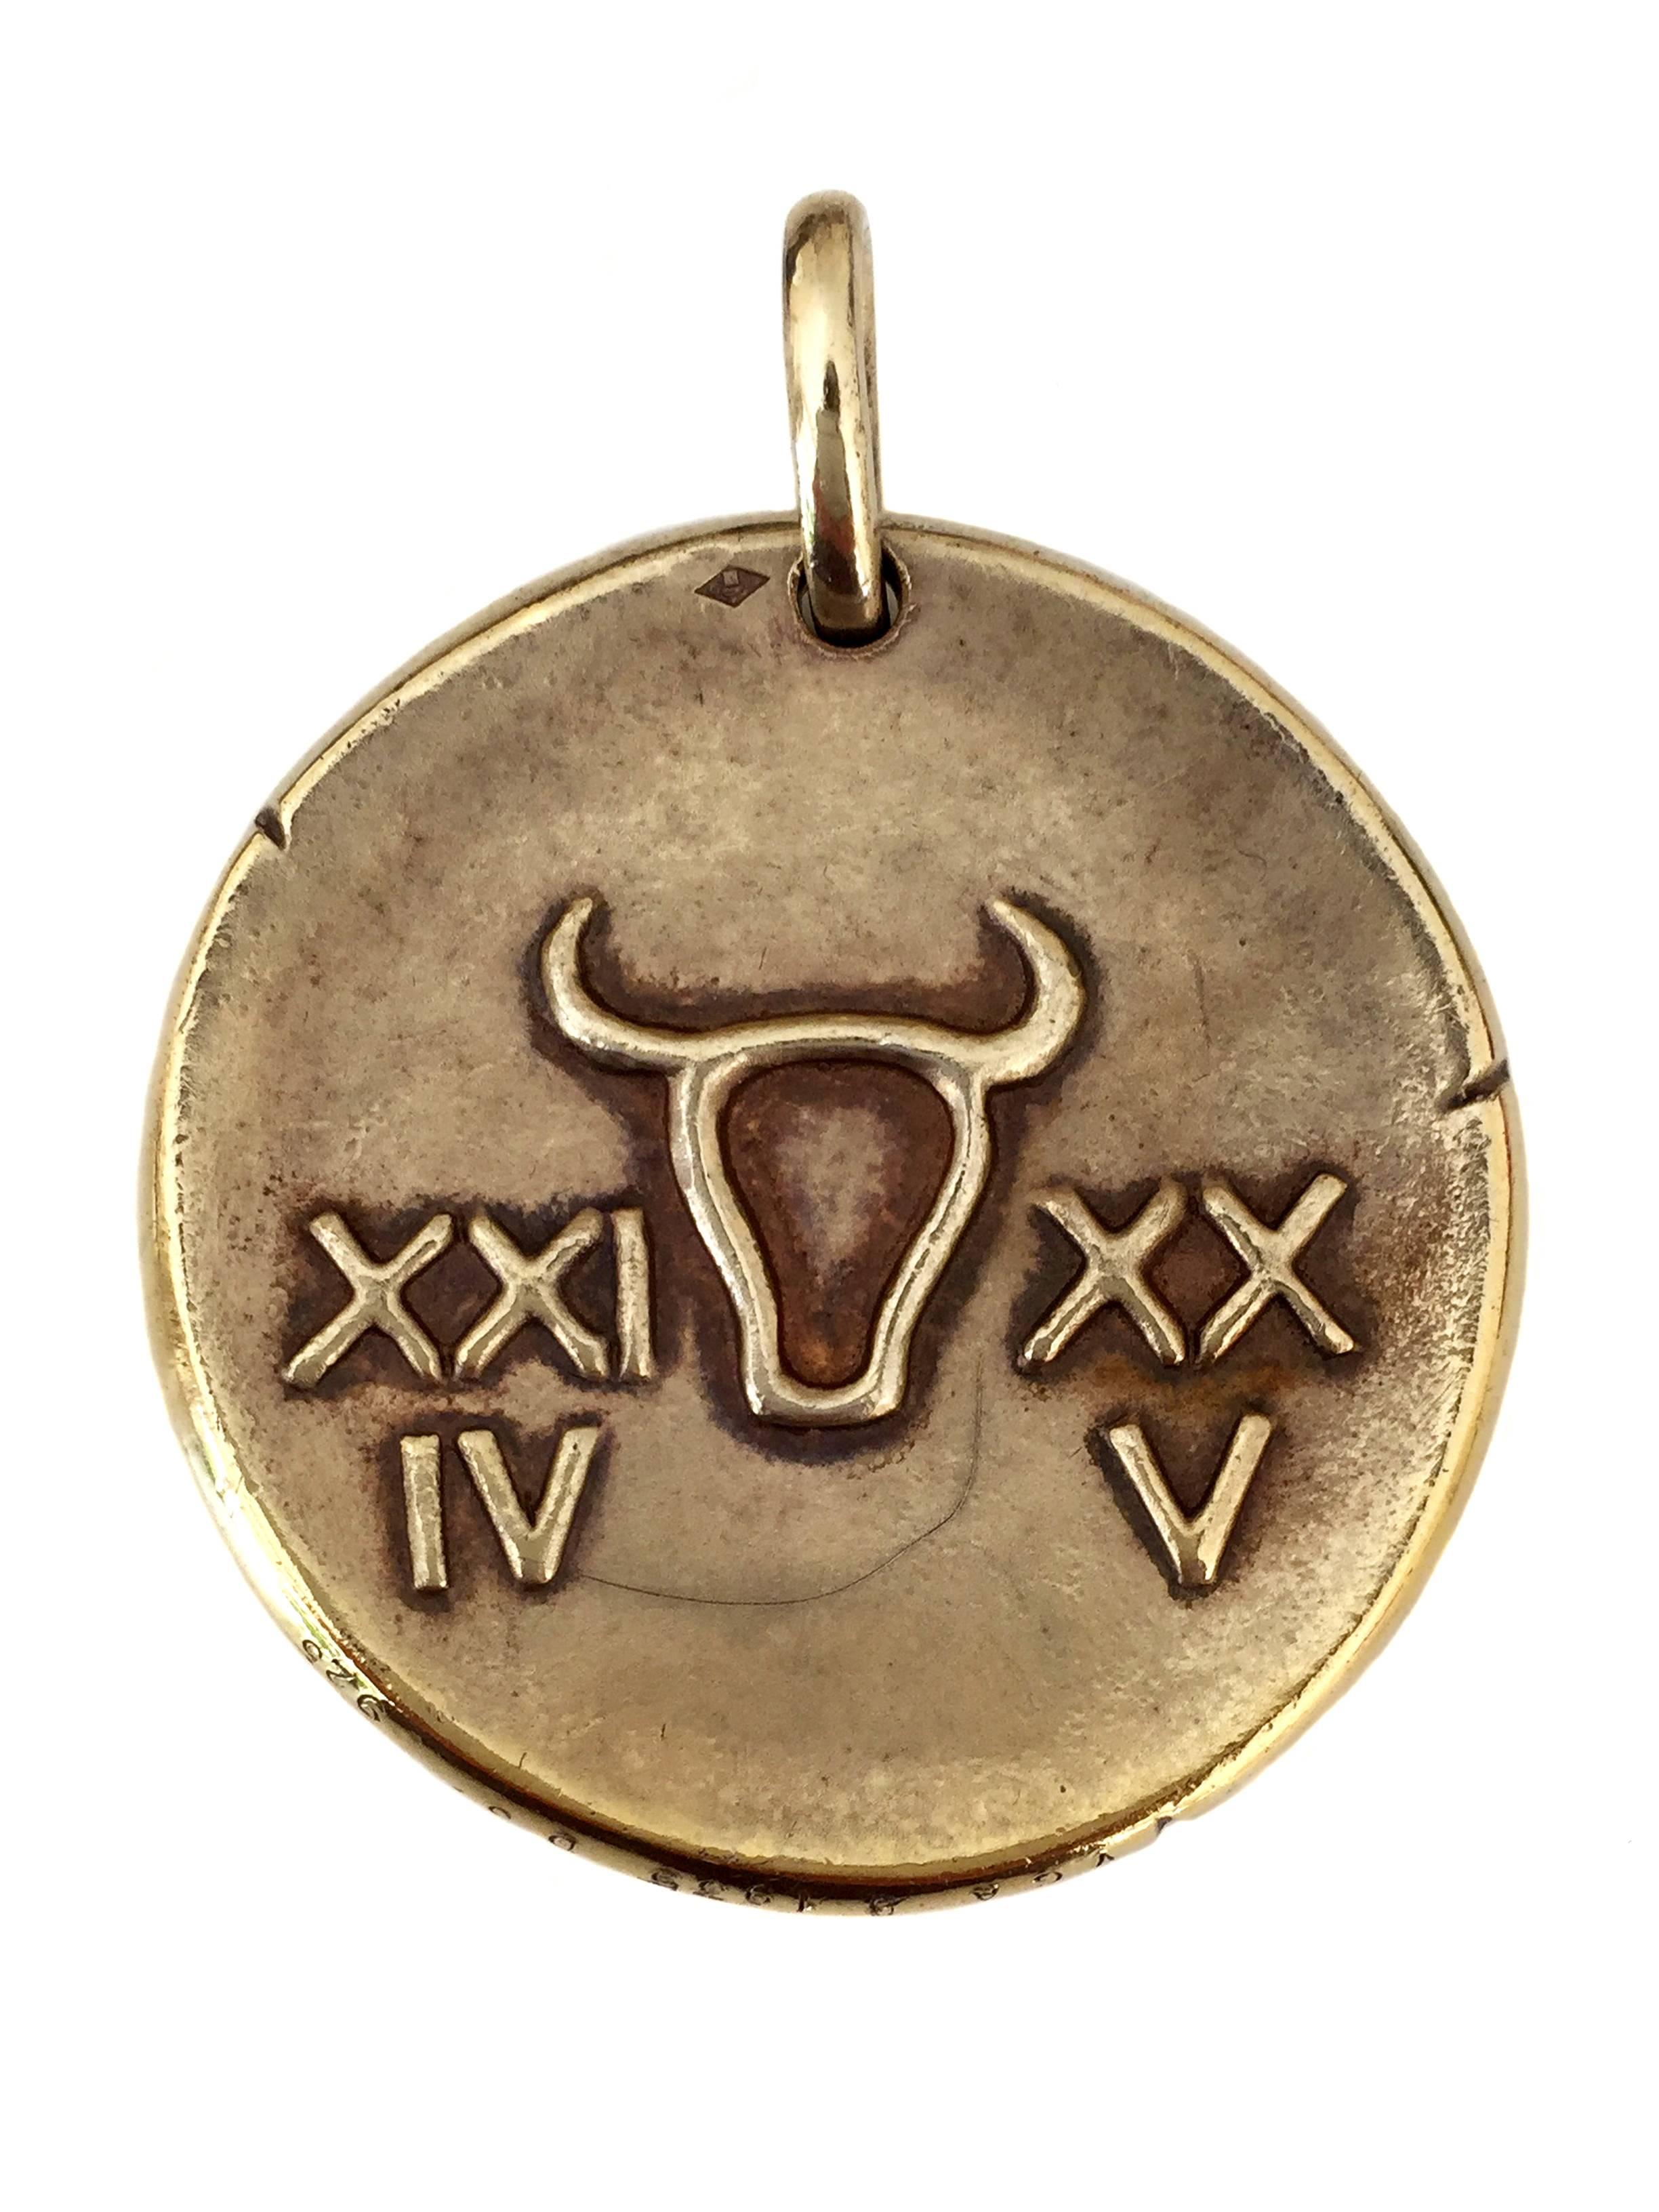 Taurus Zodiac Pendant - Circa 1960

Designed in the style of an ancient coin, this Taurus zodiac pendant is for those born between April 19- May 20. The front of the gold pendant features a magnificent crafted two dimensional Bull. The reverse side